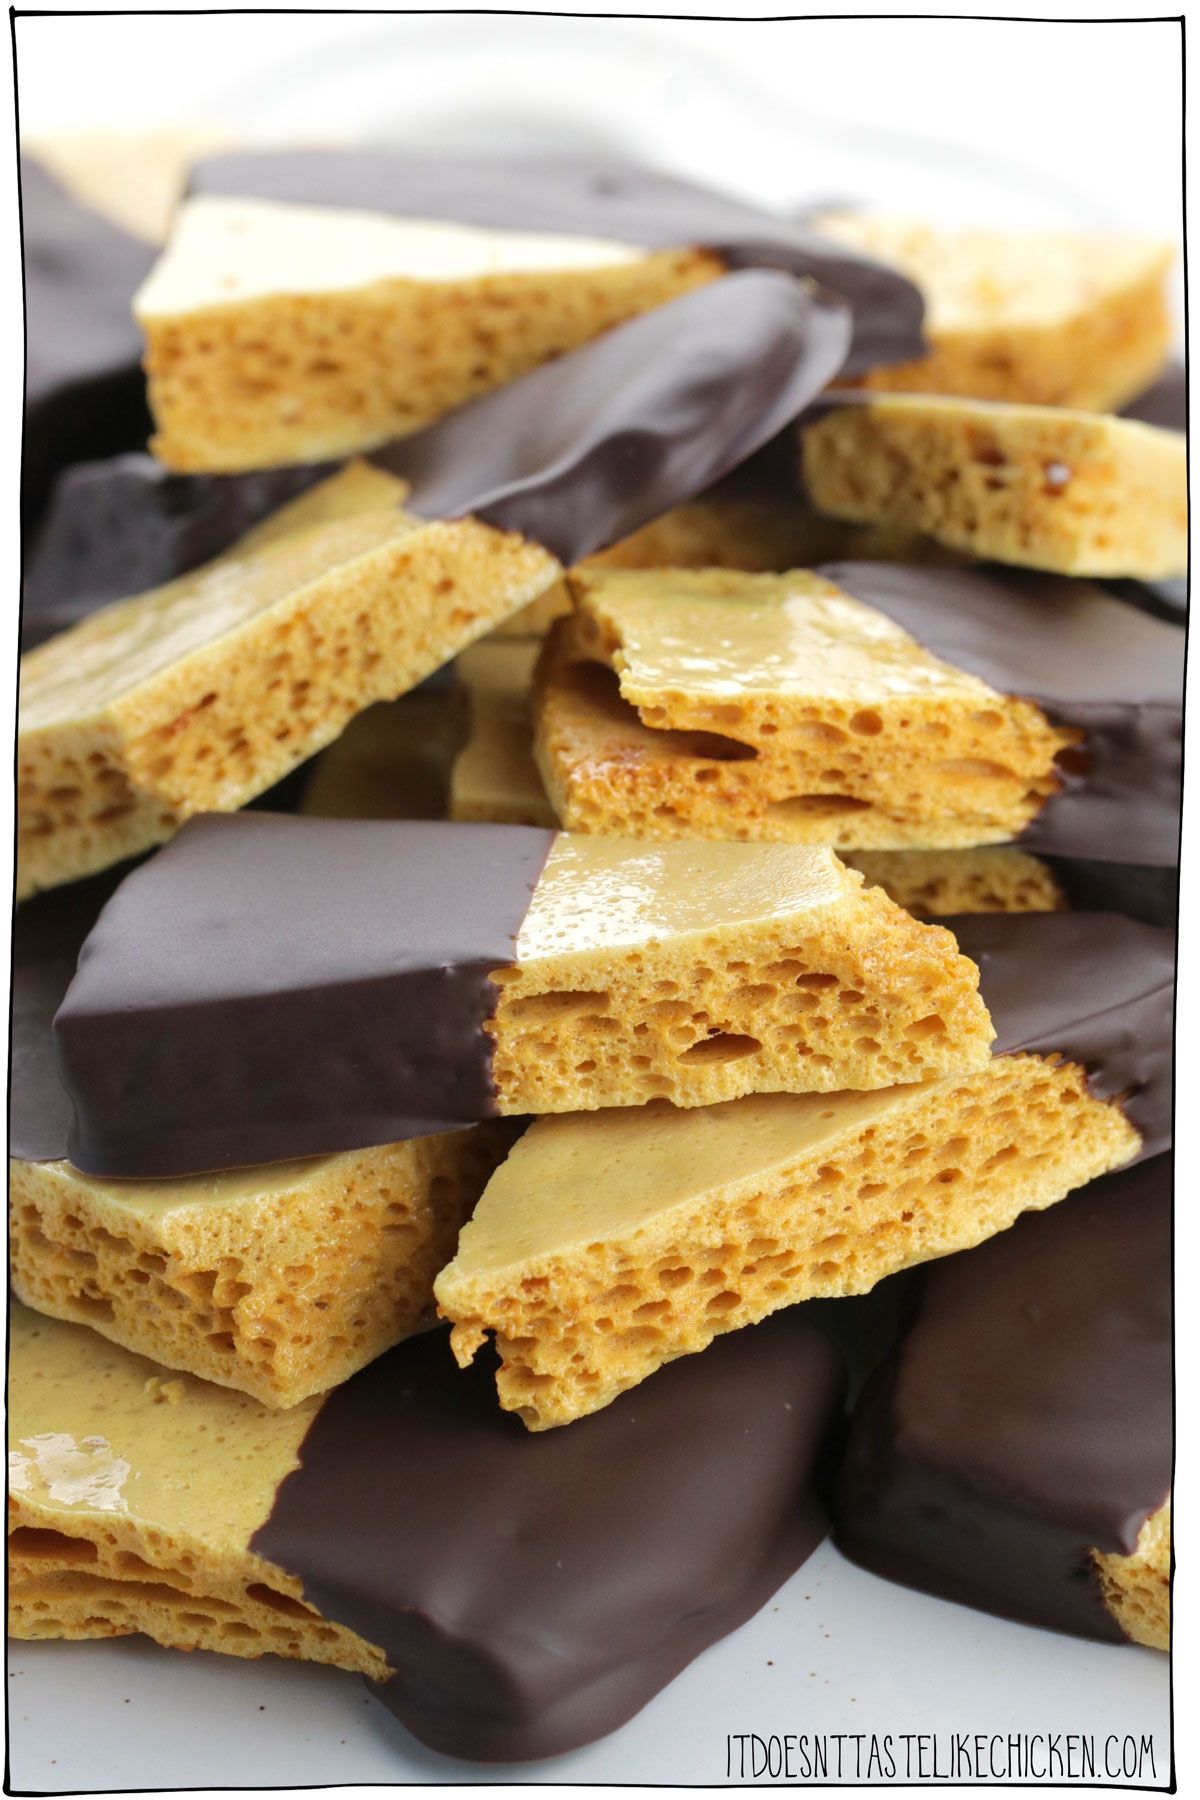 Just 5 ingredients and surprisingly easy to make, this vegan chocolate-dipped honeycomb is a super crunchy, sweet, caramel-y, chocolatey treat that you just can't get enough of! It tastes just like a Cadbury Crunchie Bar but better, and it's vegan too! #itdoesnttastelikechicken #veganbaking #vegandesserts